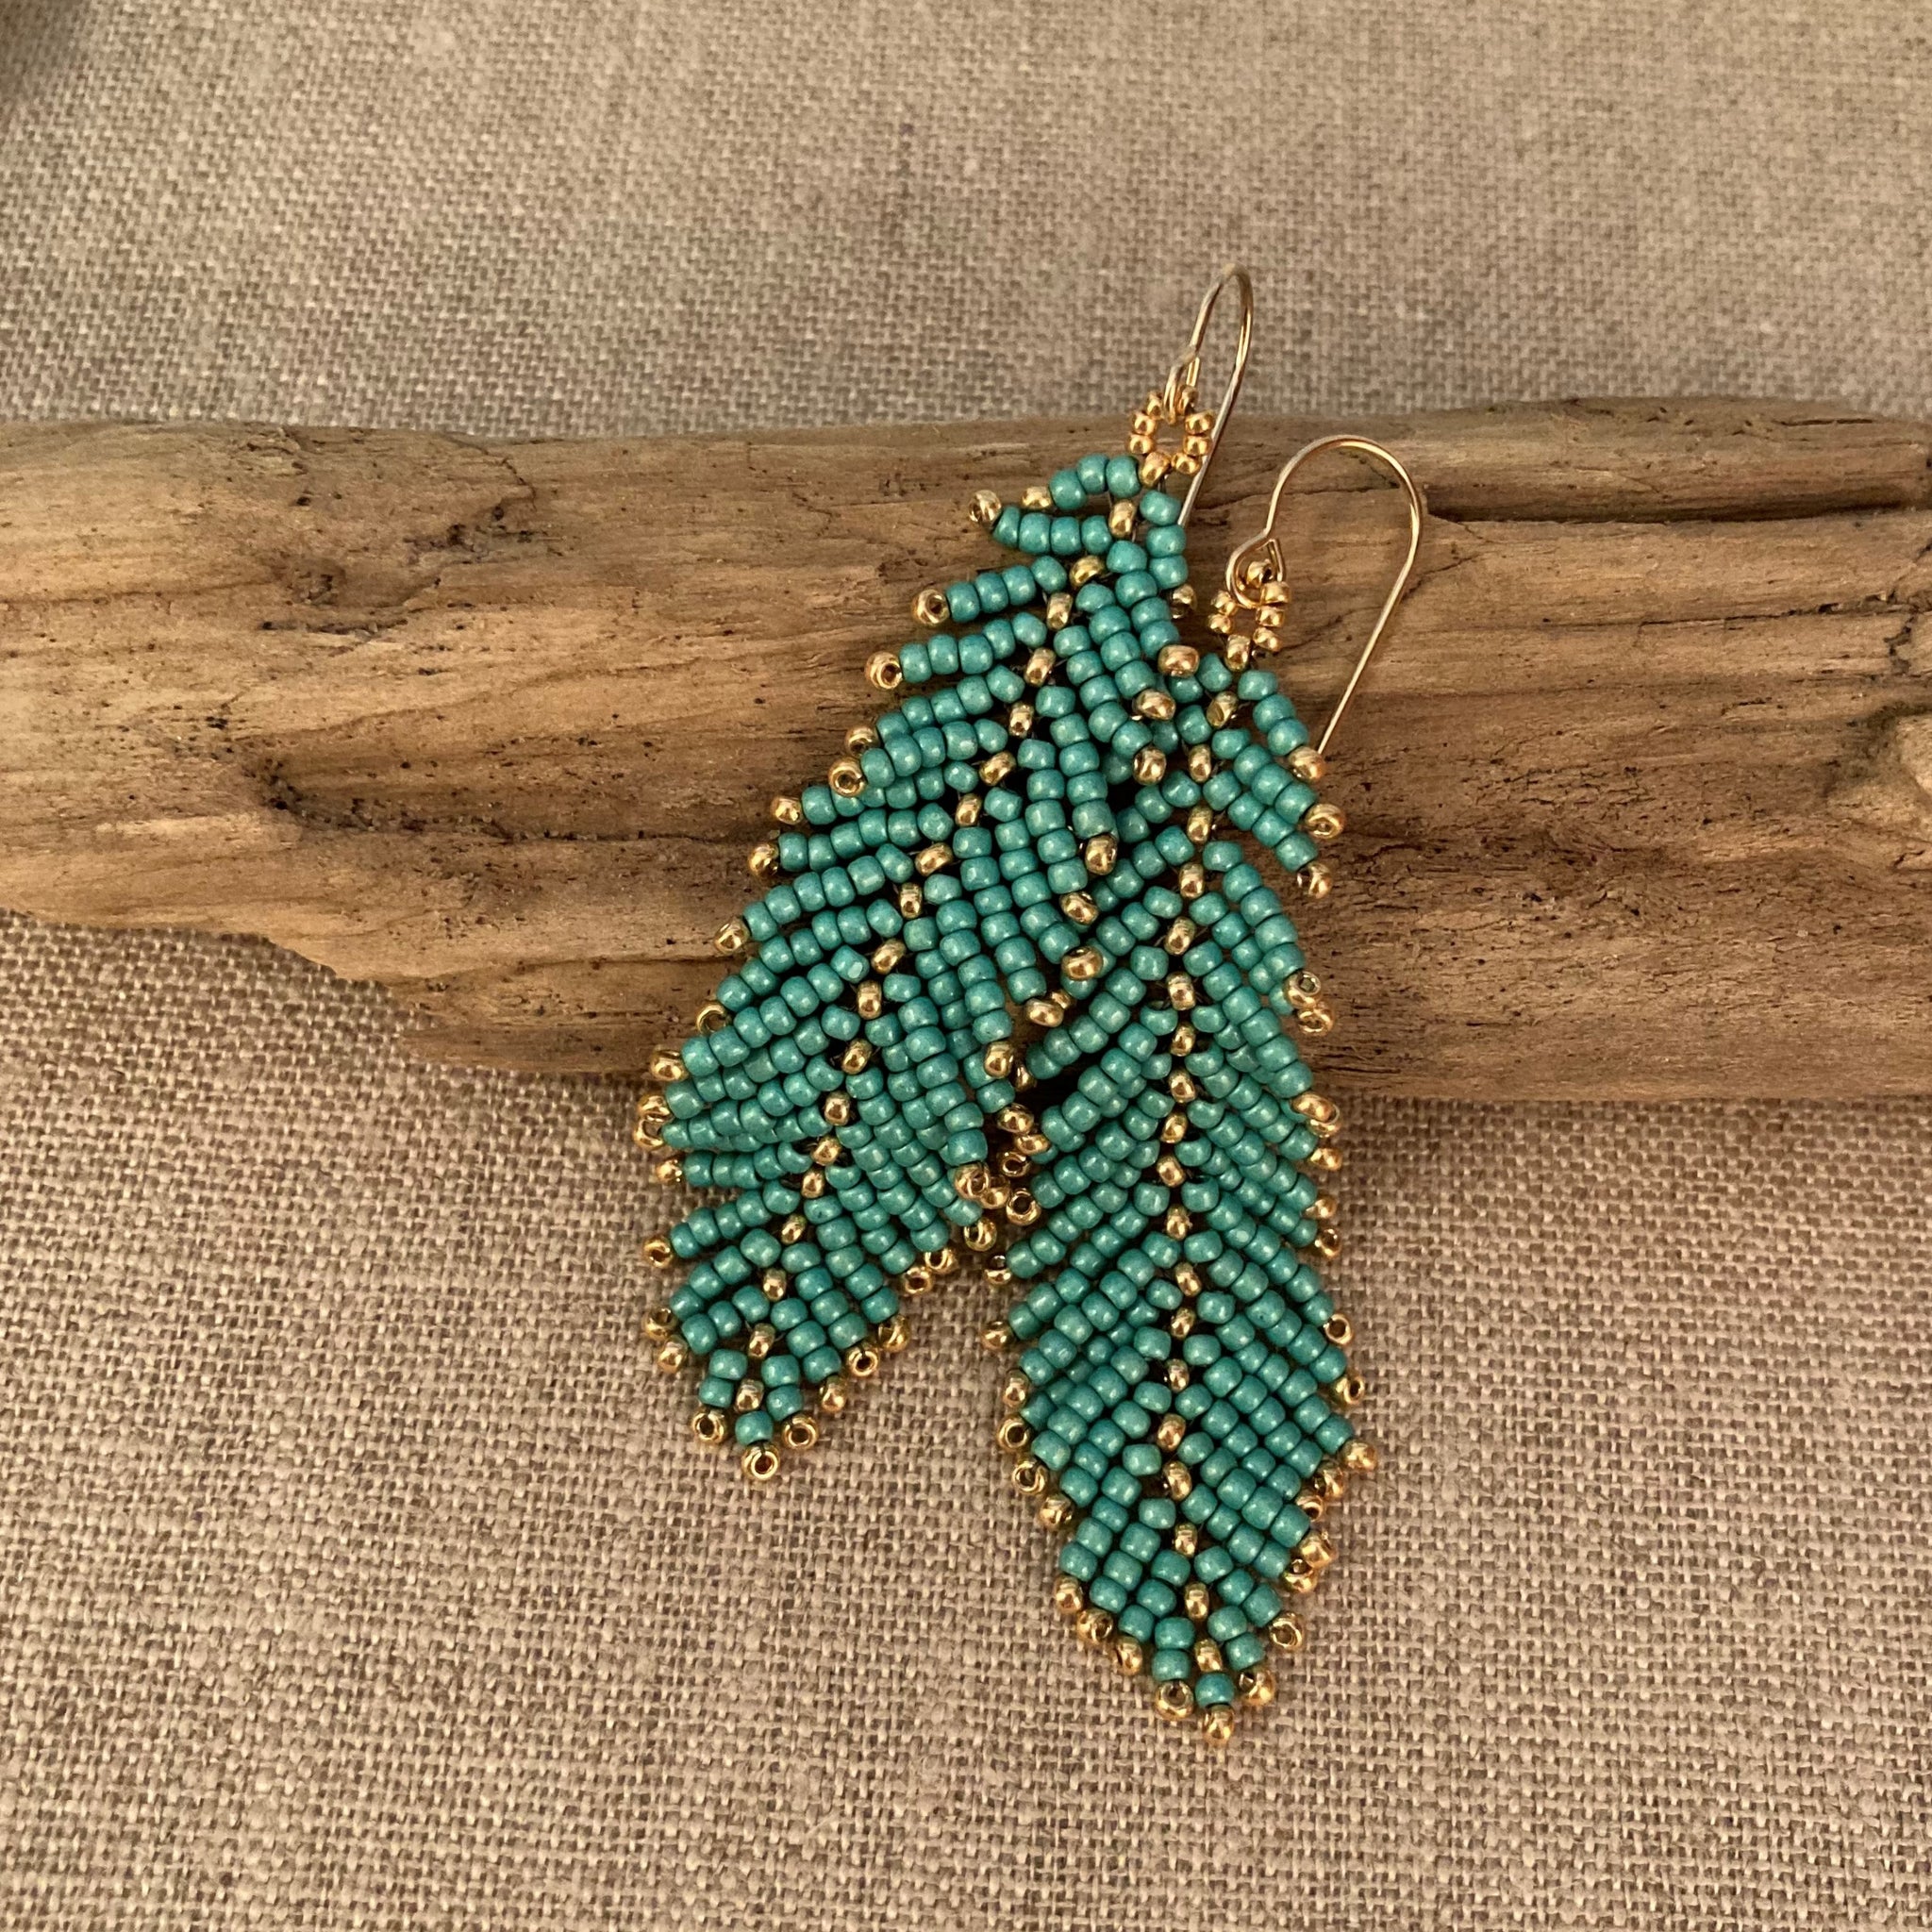 Feather leaf seed bead earrings Turquoise green gold 14K gold filled resort beach  Summer lightweight Beaded By The Beach handmade USA 